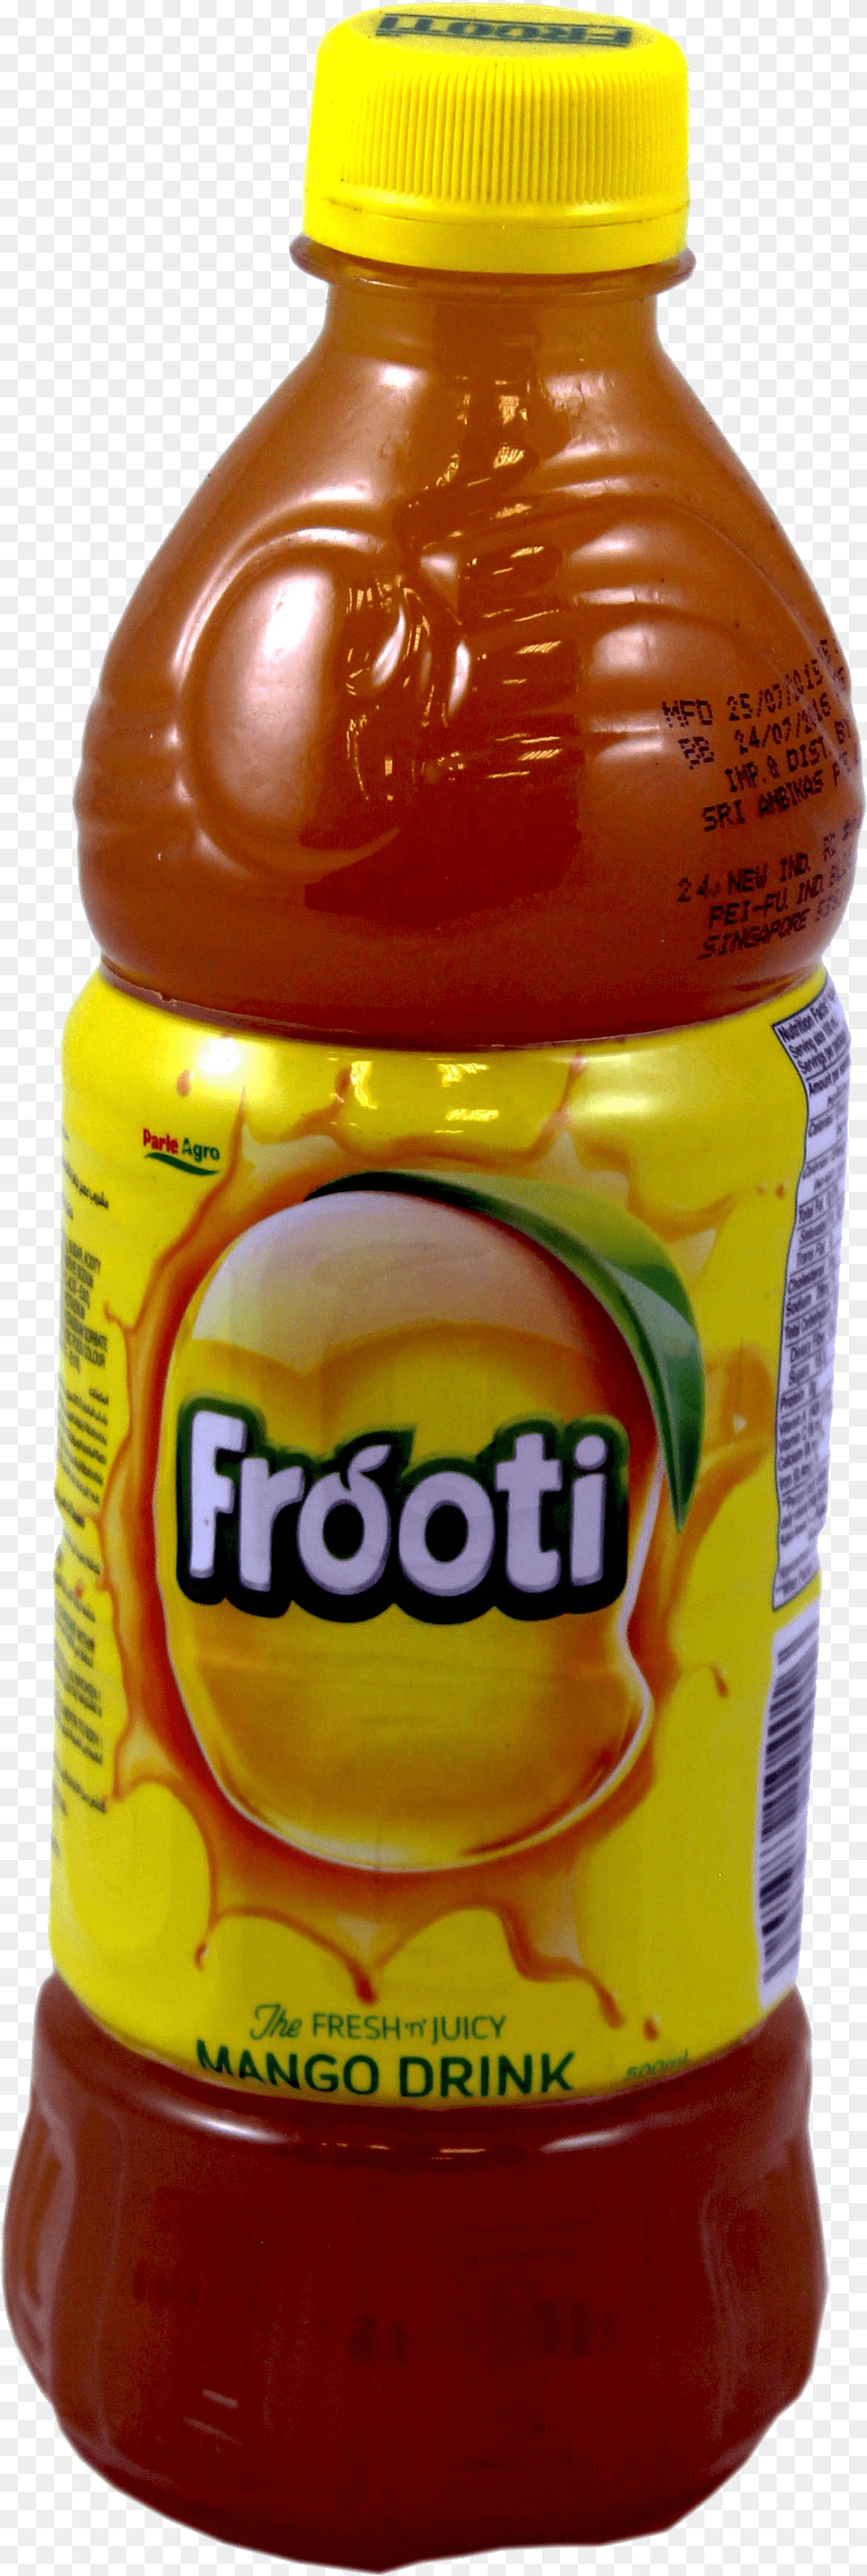 Frooti Background Carbonated Soft Drinks Free Png Download